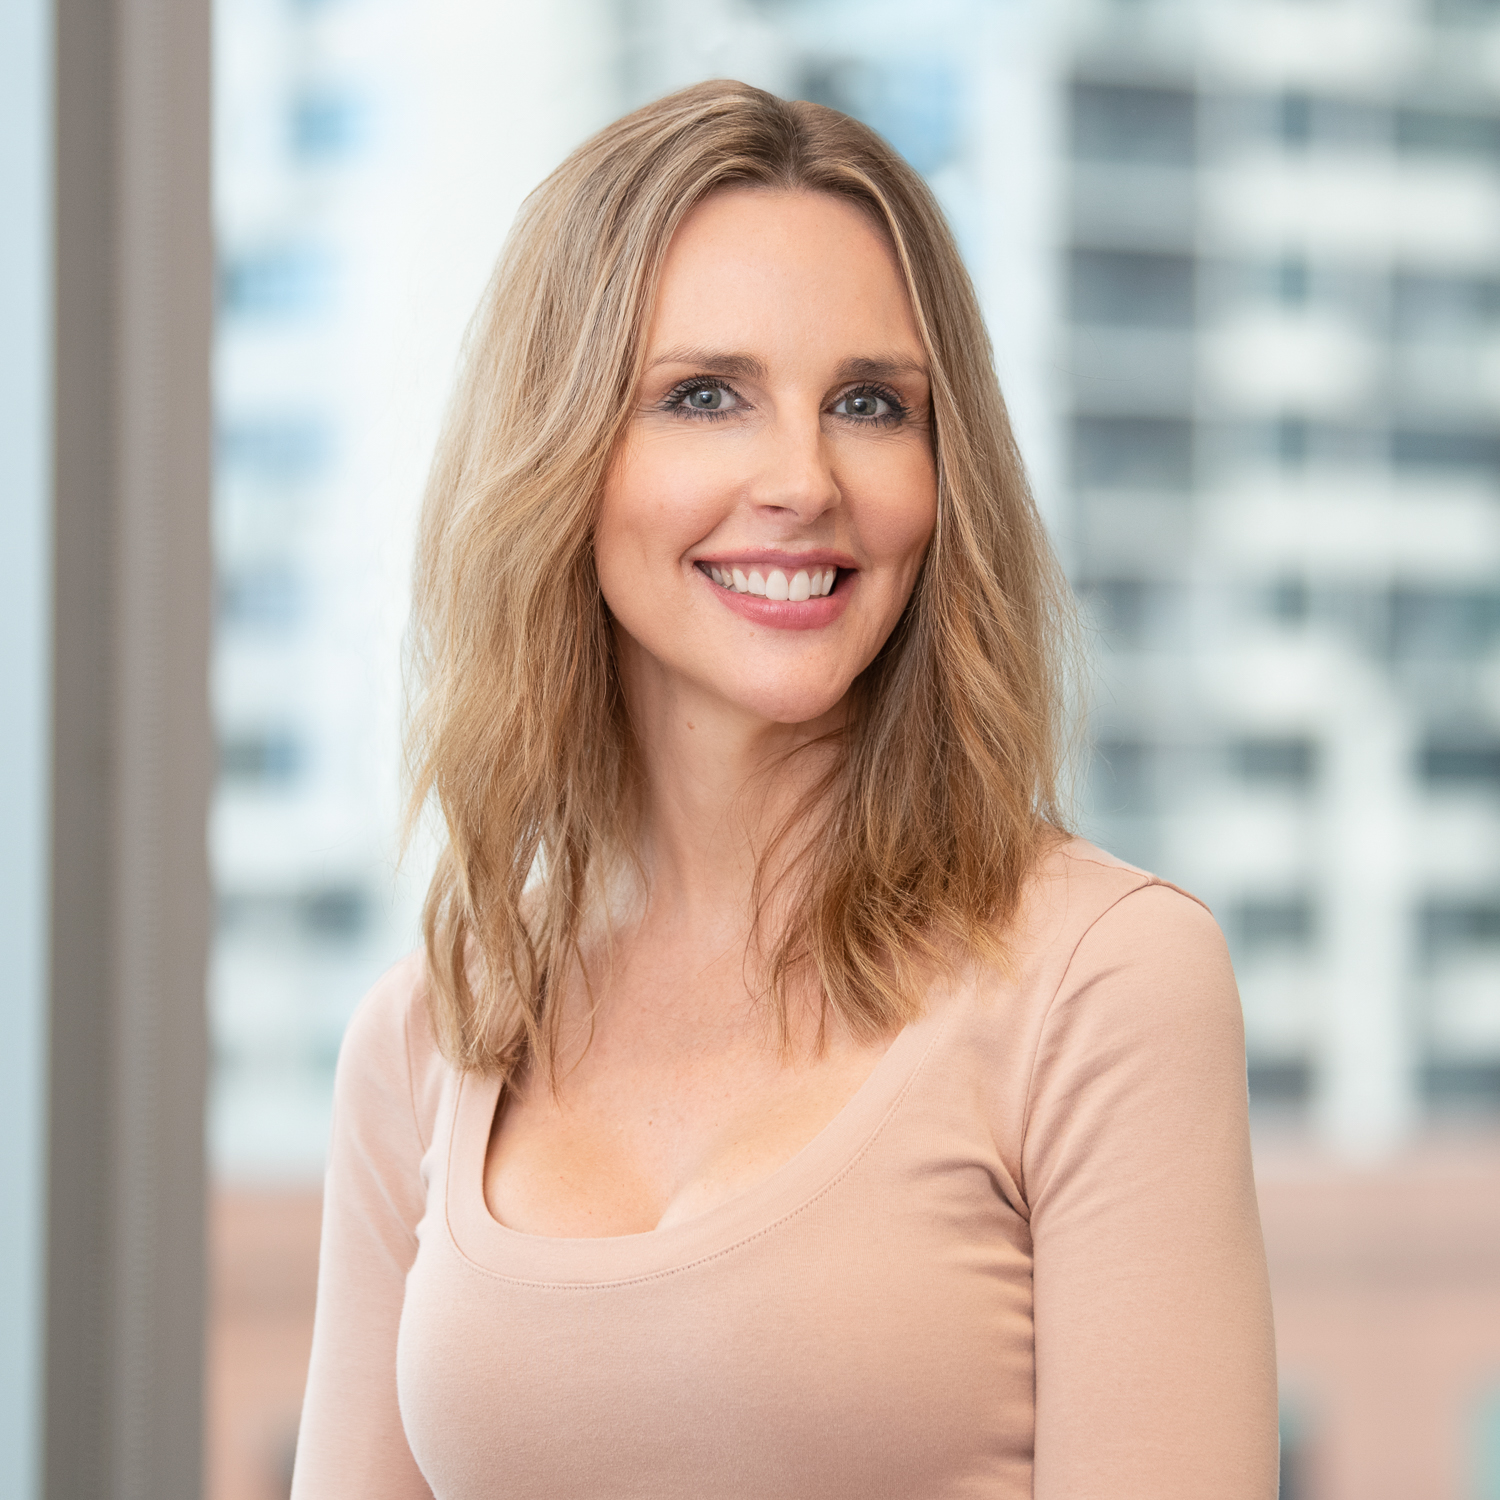 Melbourne Lawyer headshot with a city skyline building in the background. Woman is smiling at the camera.